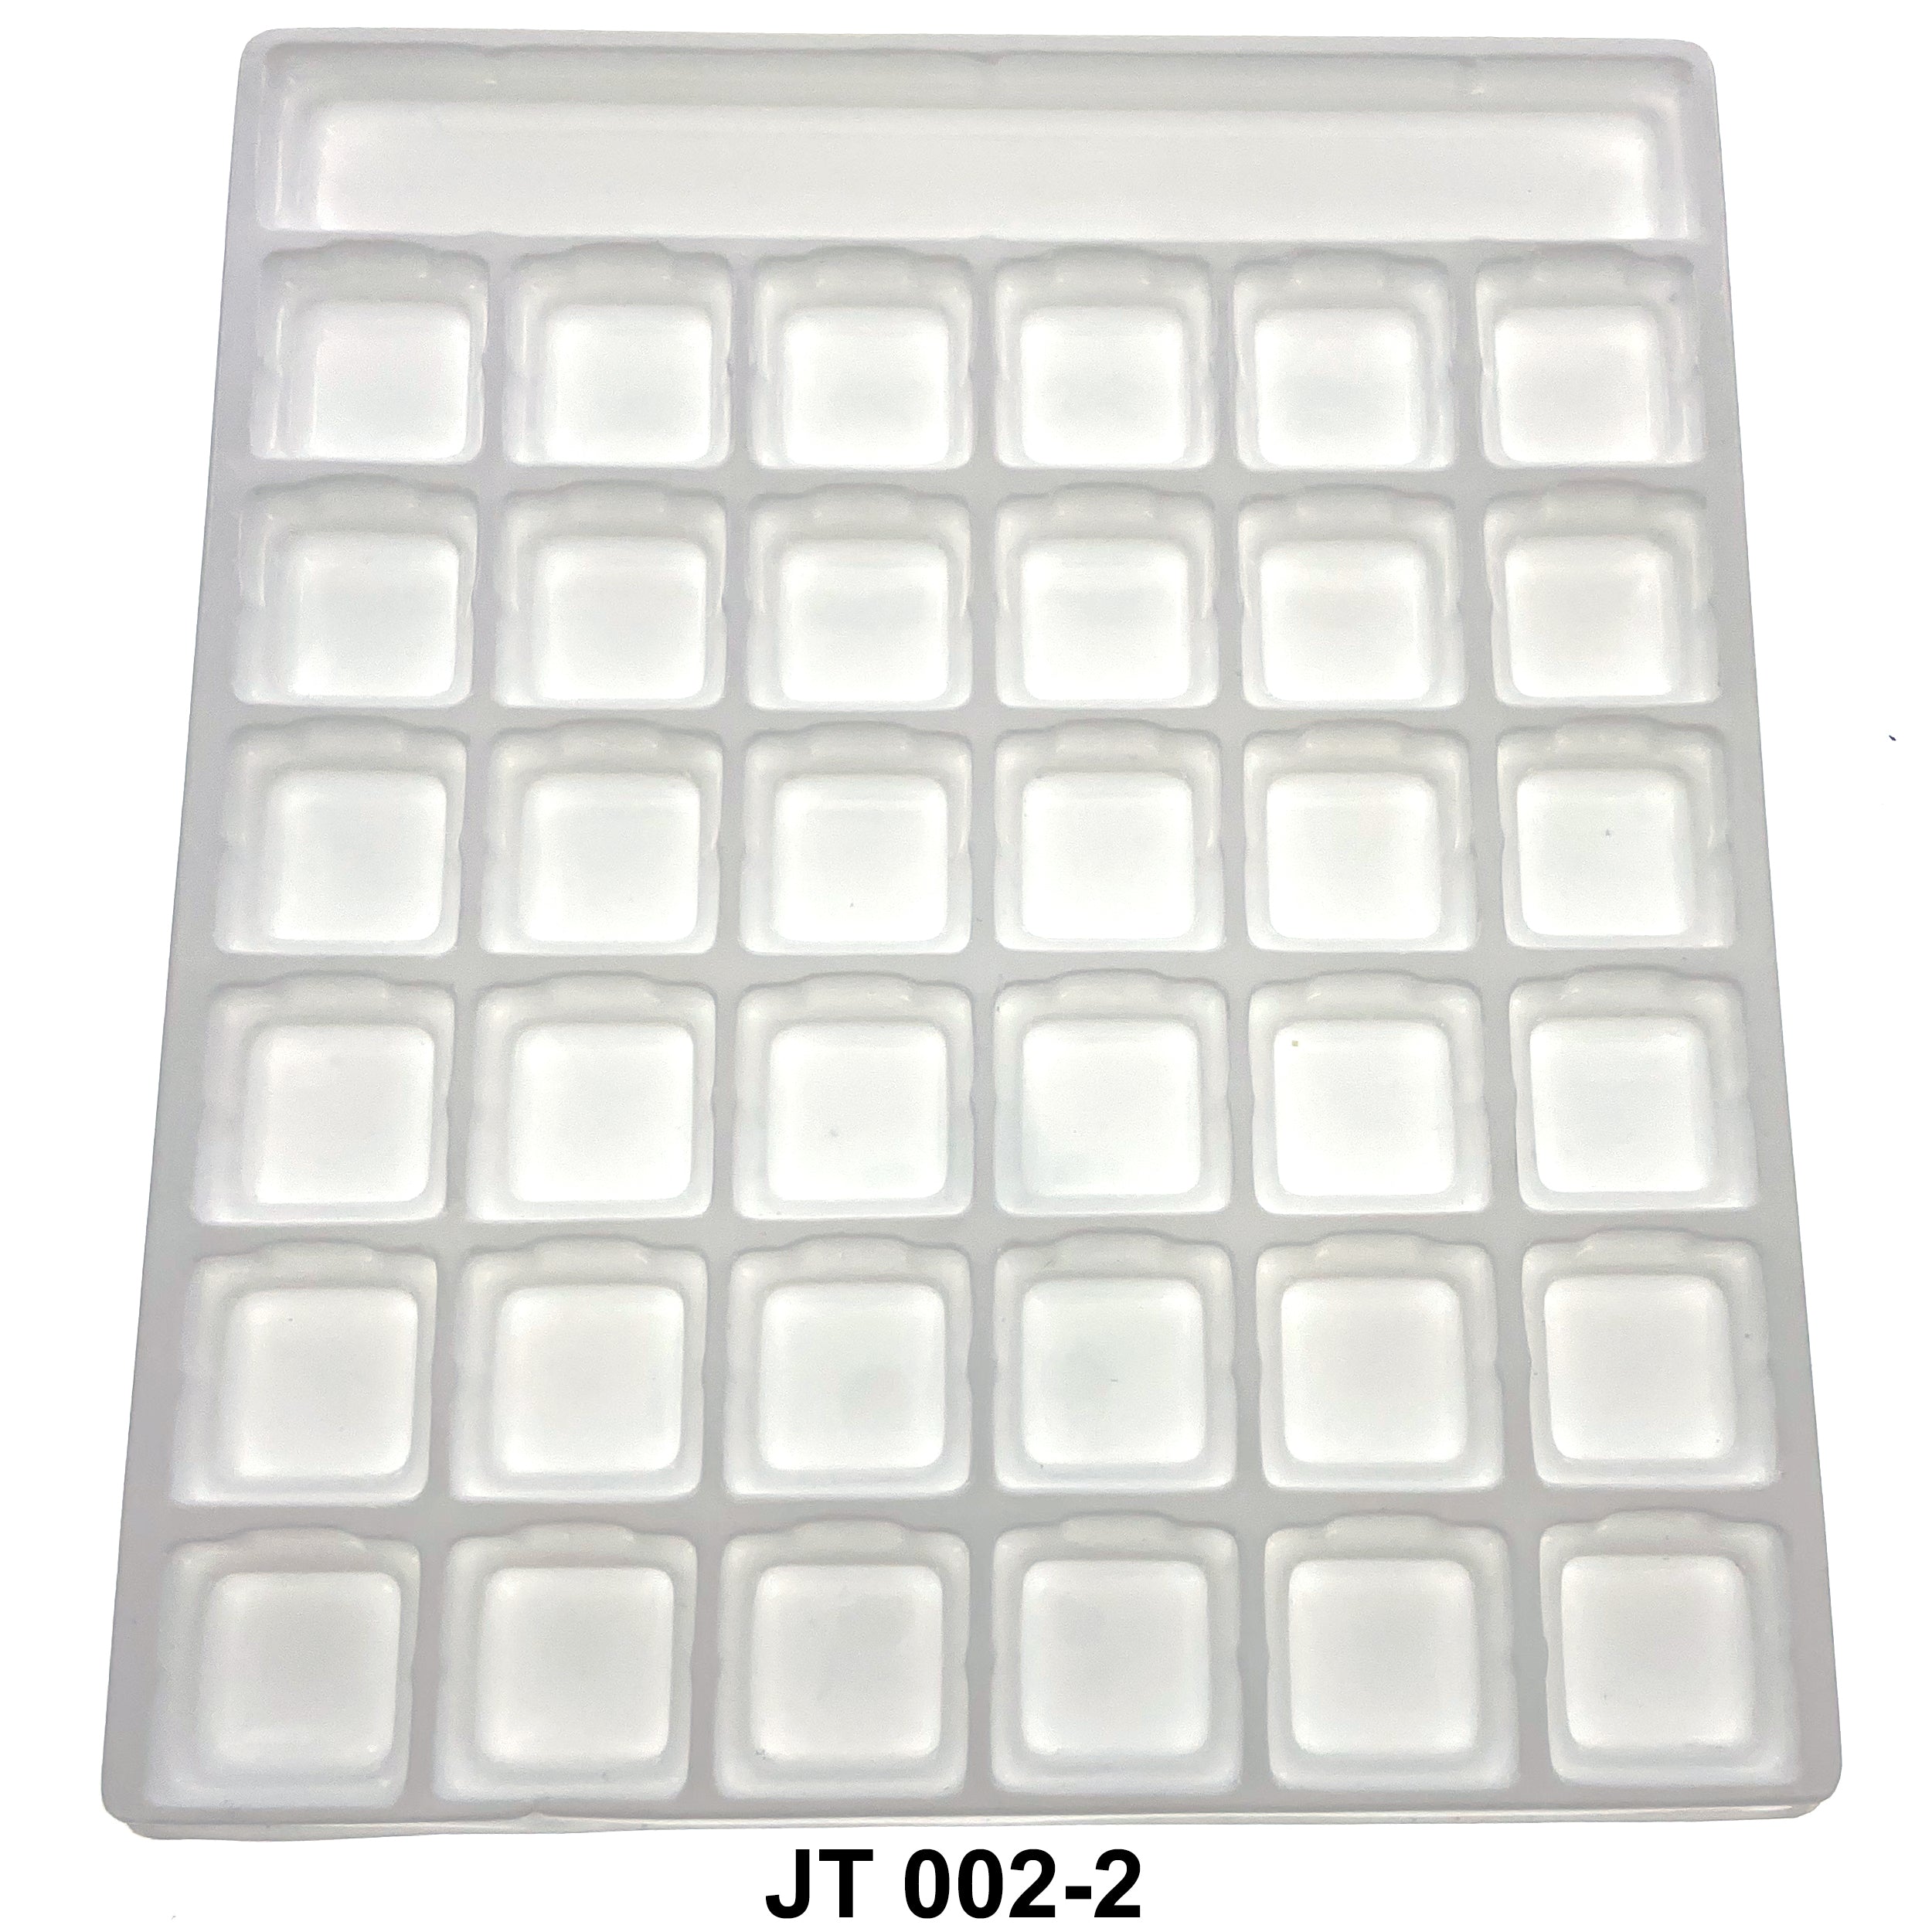 36 Square Cards Tray JT 002-2